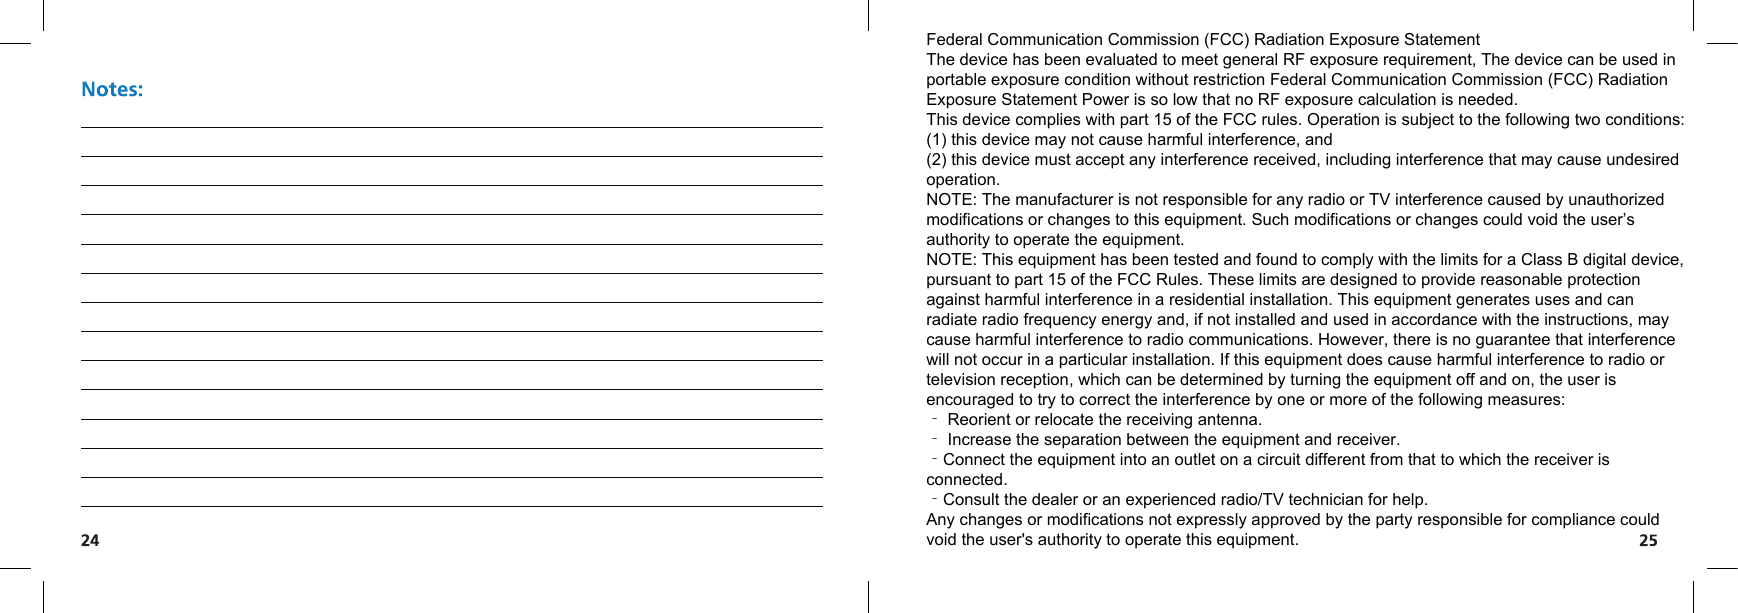 Federal Communication Commission (FCC) Radiation Exposure StatementThe device has been evaluated to meet general RF exposure requirement, The device can be used in portable exposure condition without restriction Federal Communication Commission (FCC) Radiation Exposure Statement Power is so low that no RF exposure calculation is needed.This device complies with part 15 of the FCC rules. Operation is subject to the following two conditions: (1) this device may not cause harmful interference, and(2) this device must accept any interference received, including interference that may cause undesired operation. NOTE: The manufacturer is not responsible for any radio or TV interference caused by unauthorized modifications or changes to this equipment. Such modifications or changes could void the user’s authority to operate the equipment.NOTE: This equipment has been tested and found to comply with the limits for a Class B digital device, pursuant to part 15 of the FCC Rules. These limits are designed to provide reasonable protection against harmful interference in a residential installation. This equipment generates uses and can radiate radio frequency energy and, if not installed and used in accordance with the instructions, may cause harmful interference to radio communications. However, there is no guarantee that interference will not occur in a particular installation. If this equipment does cause harmful interference to radio or television reception, which can be determined by turning the equipment off and on, the user is encouraged to try to correct the interference by one or more of the following measures:‐ Reorient or relocate the receiving antenna.‐ Increase the separation between the equipment and receiver.‐Connect the equipment into an outlet on a circuit different from that to which the receiver is connected.‐Consult the dealer or an experienced radio/TV technician for help. Any changes or modifications not expressly approved by the party responsible for compliance could void the user&apos;s authority to operate this equipment.